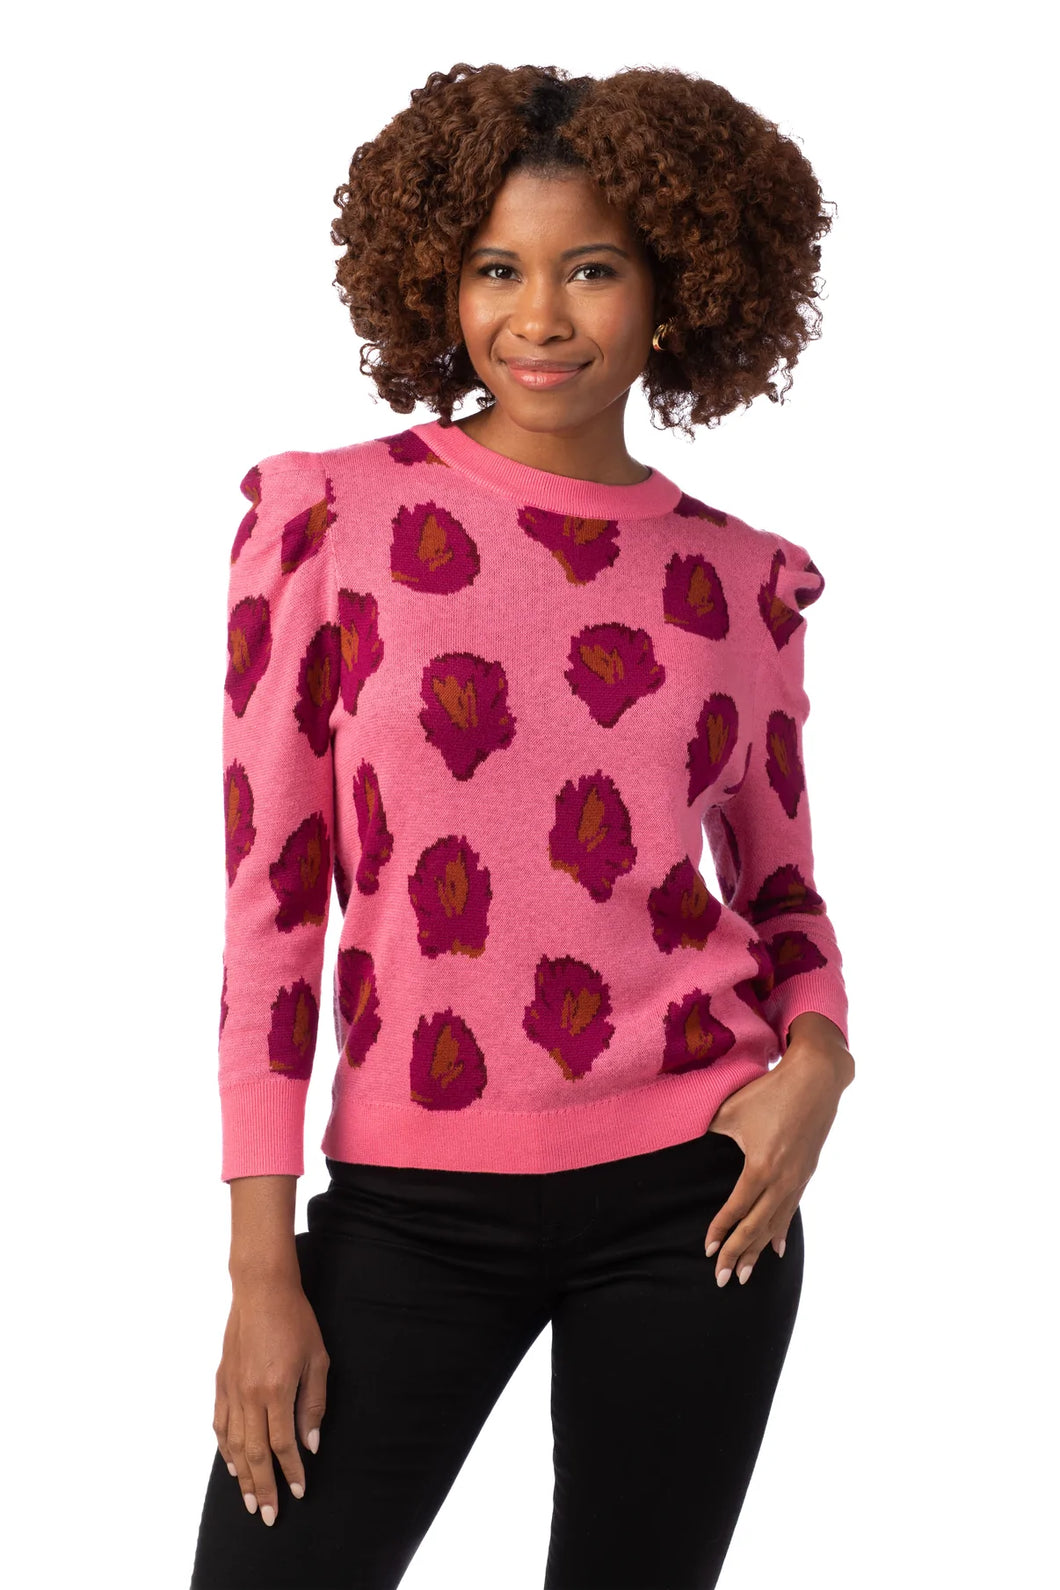 CROSBY by Mollie Burch Bixby Sweater - Pink Bloom